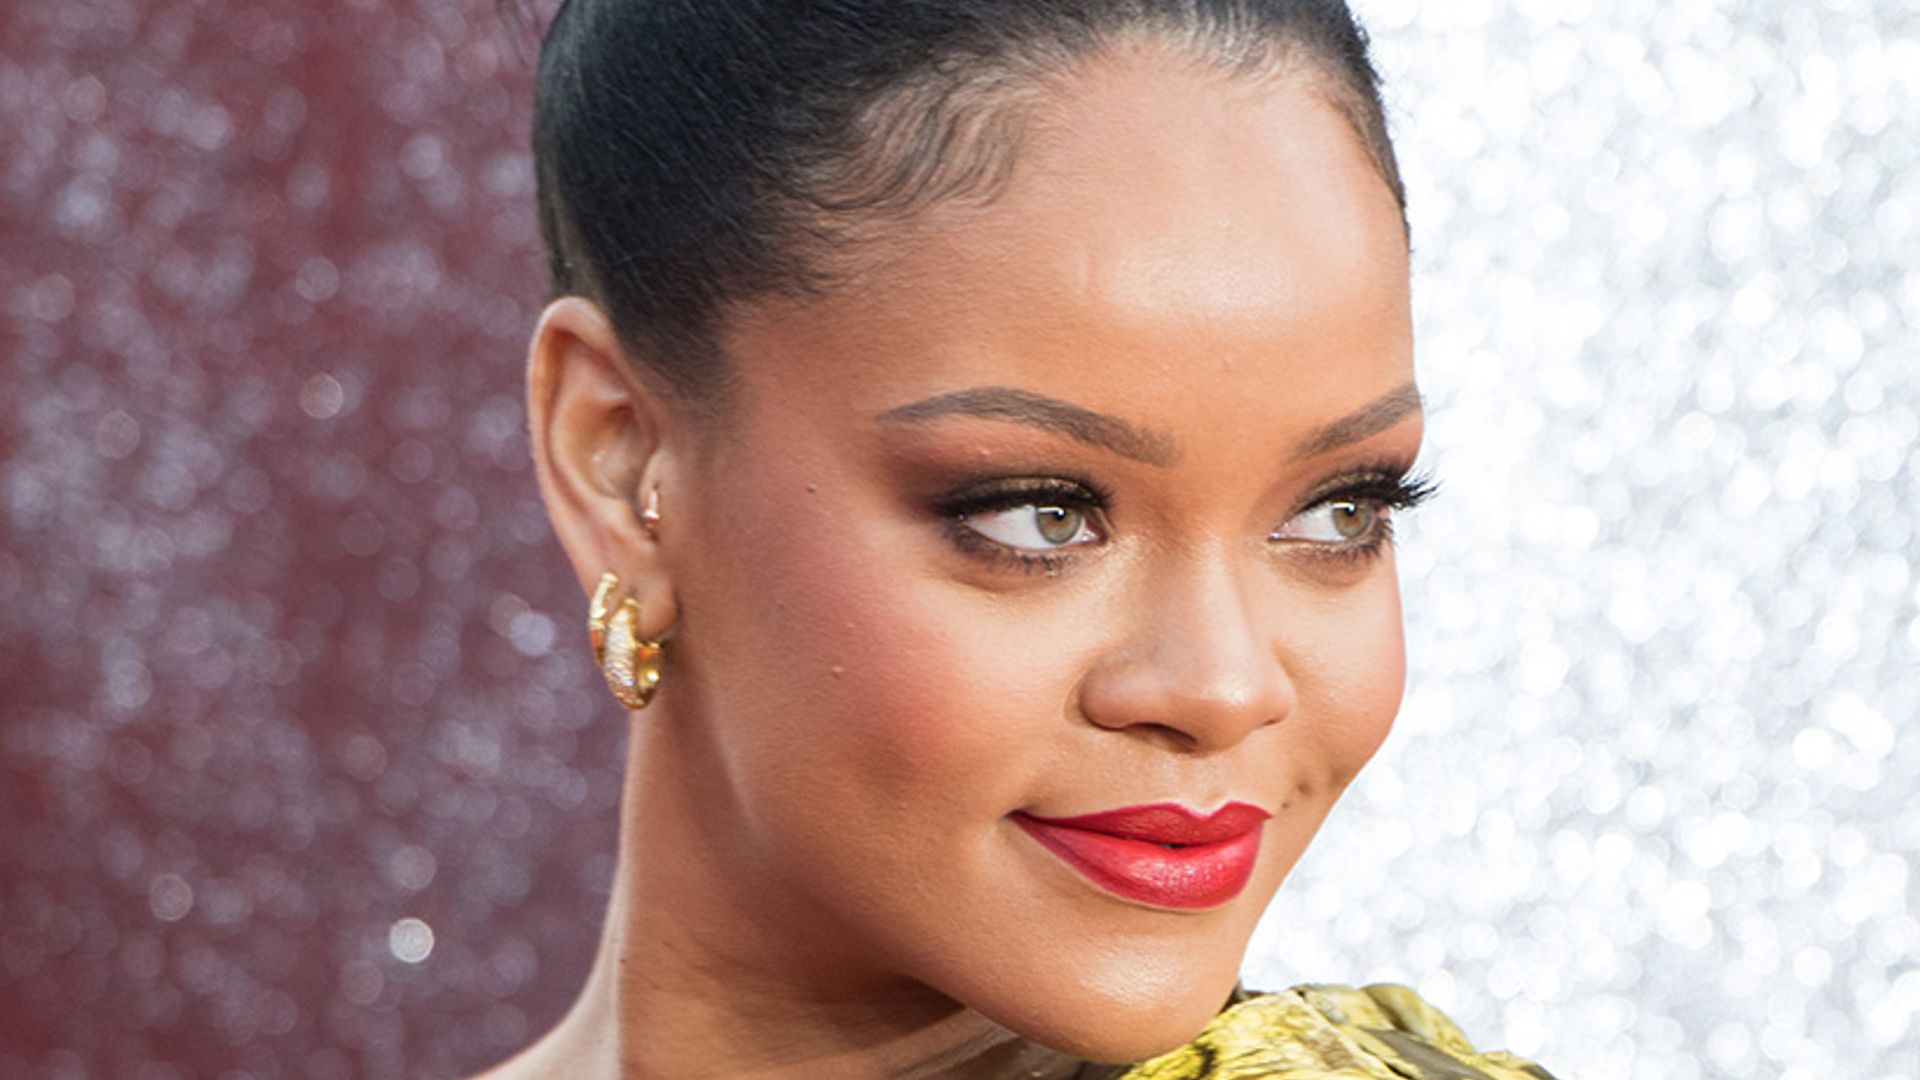 The £1 item that Rihanna uses to keep her brows looking on point